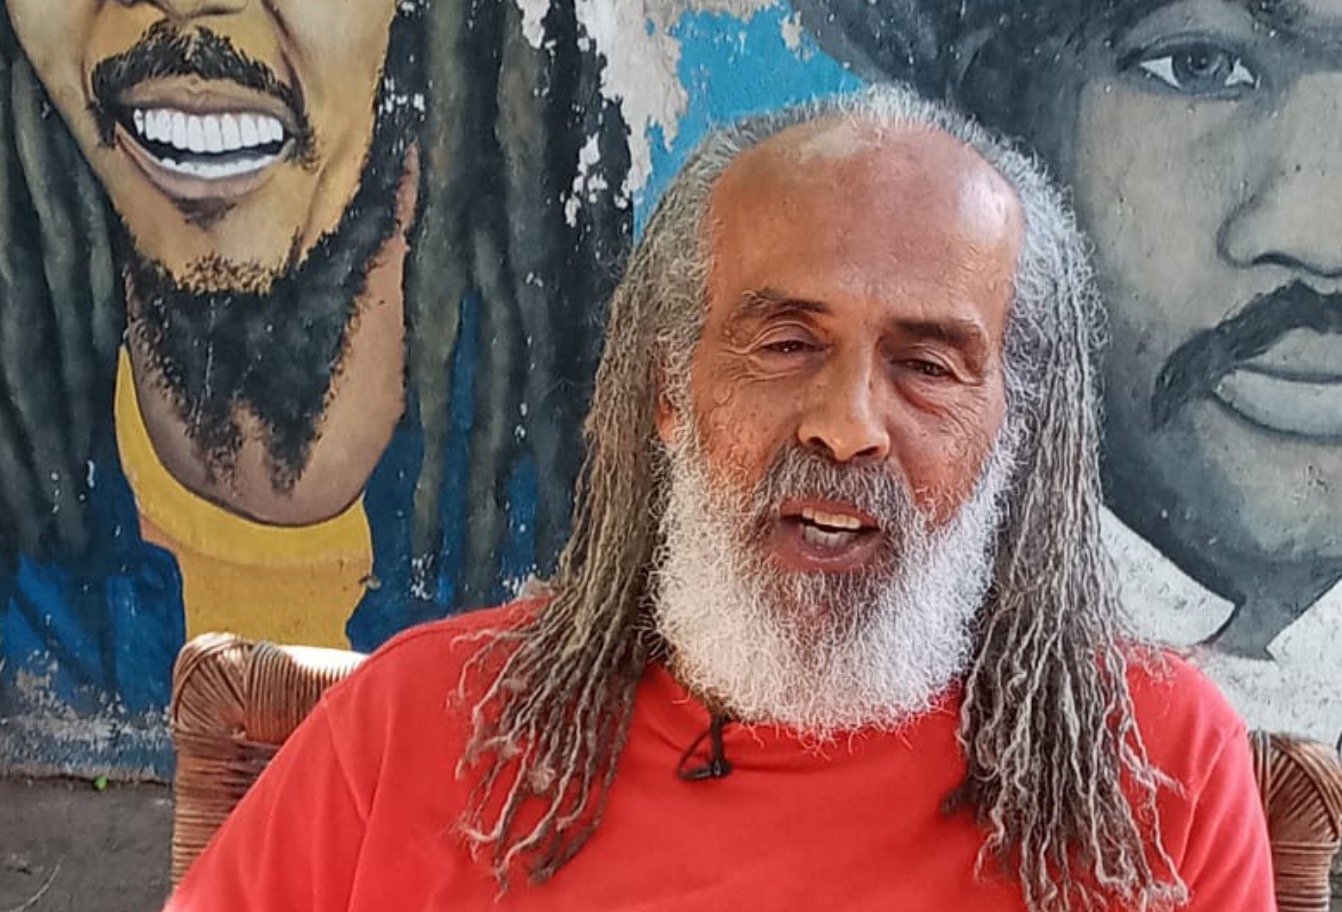 Skill Cole Talks on Bob Marleys Relationship with Peter Tosh Bunny Wailer Lee Scratch Perry Cindy and the 22Lies22 in One Love Biopic Interview